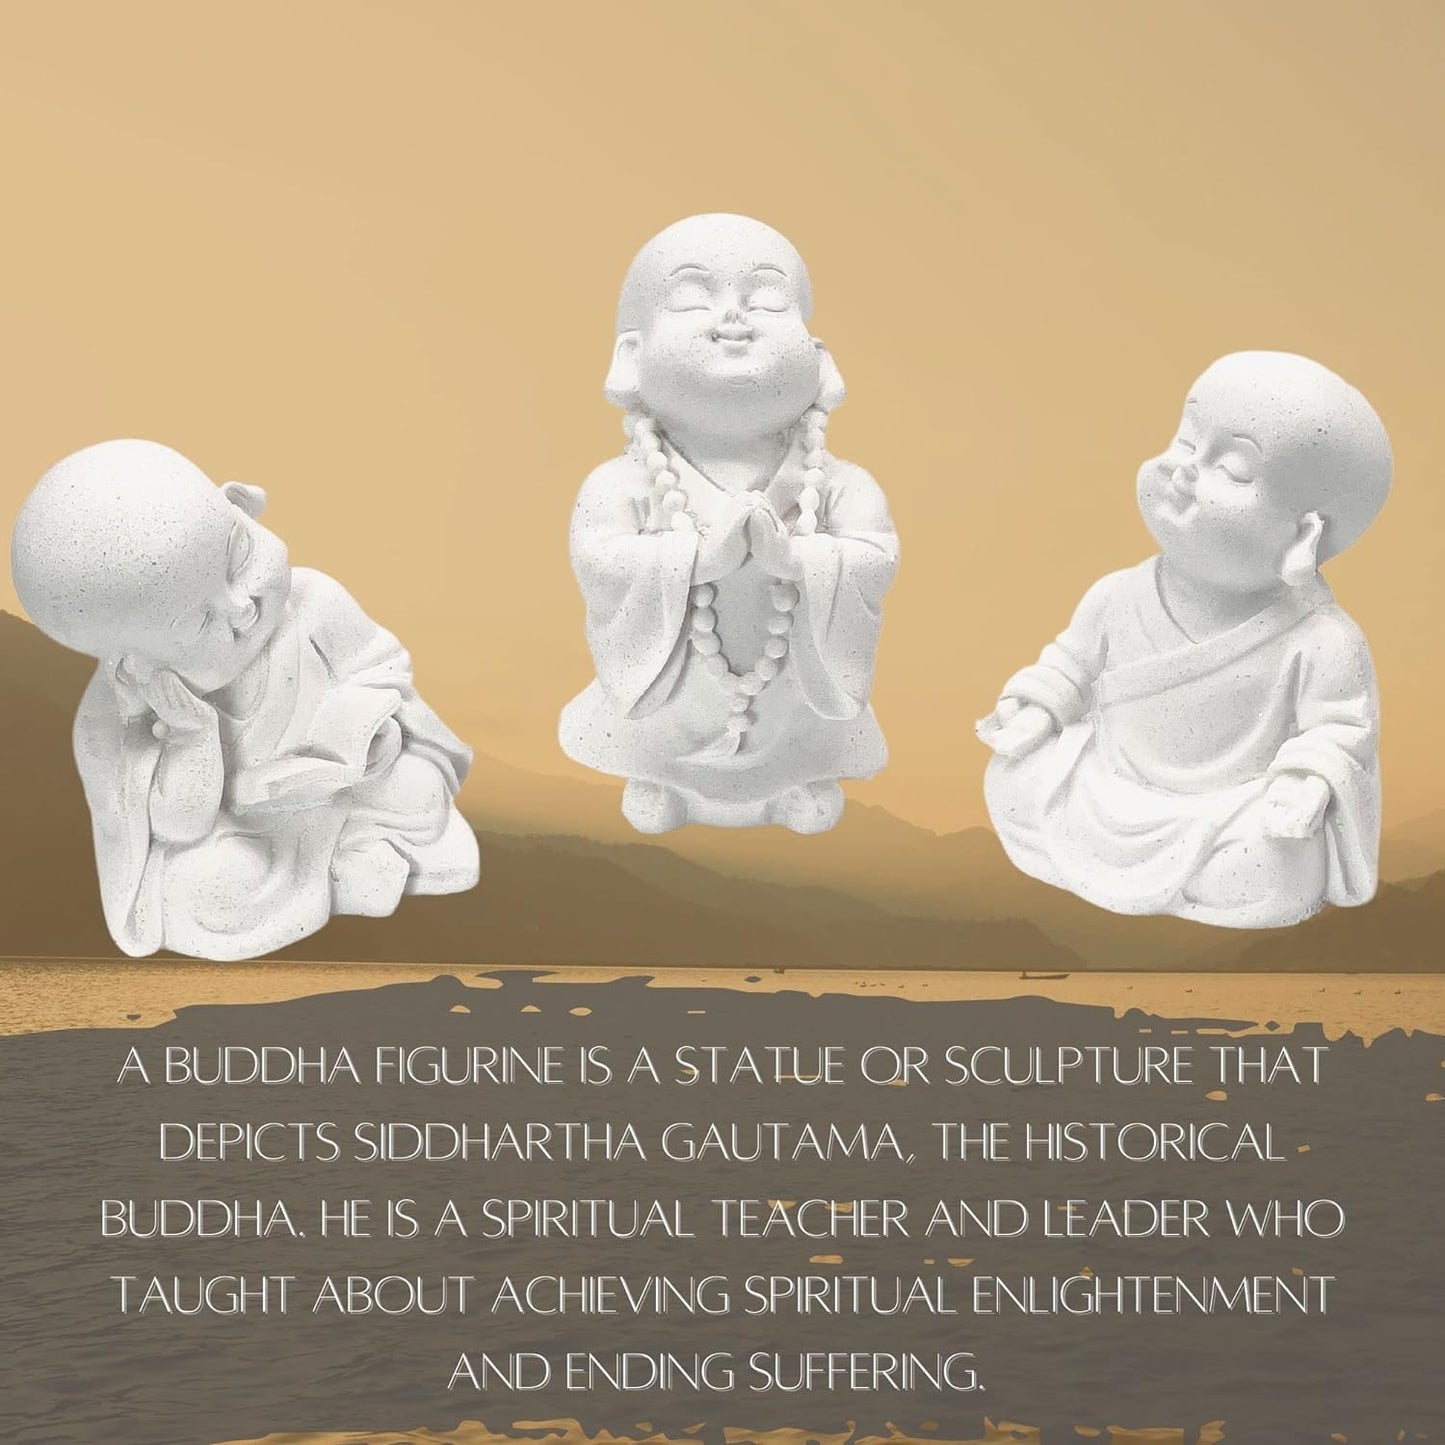 Baby Buddha Statues Cute Adorable Jizo Monks Happy Laughing Sitting Praying Meditating Relaxing Lovely Smiling Little Cutie Home Decor Set of 3 Figurines 3 Inch Sculptures